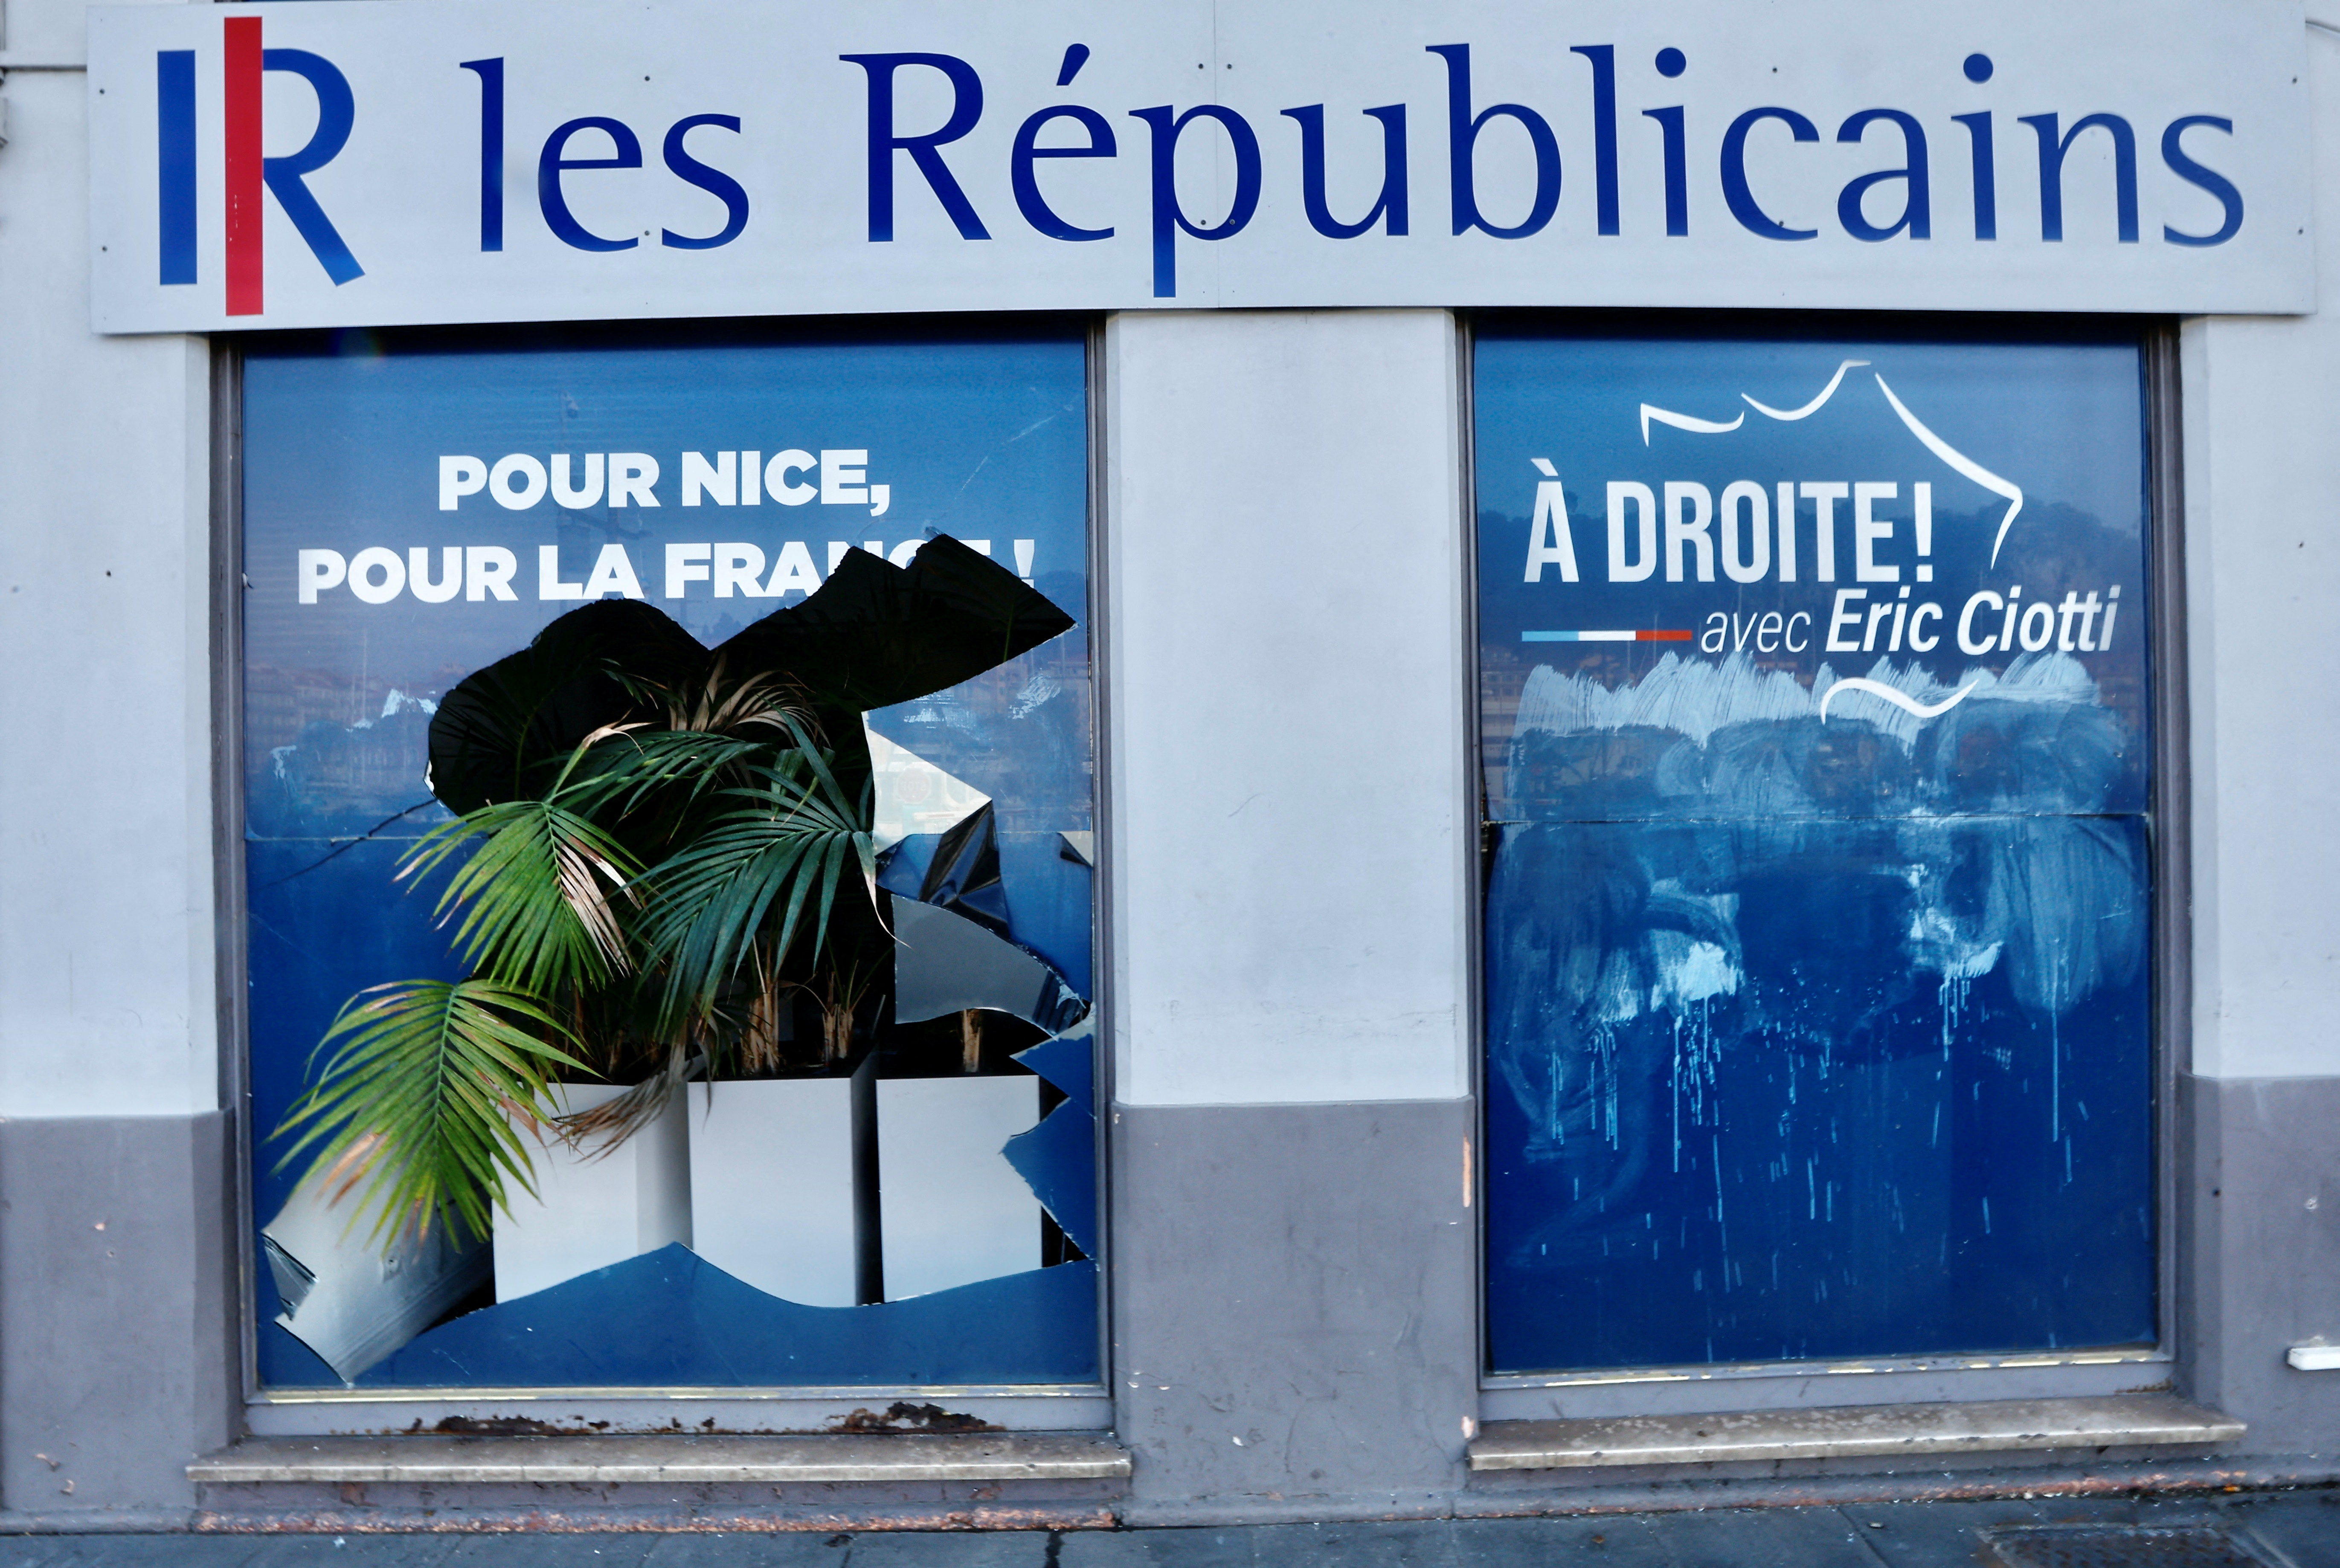 Leader of Les Republicains Eric Ciotti's office vandalized during night in Nice